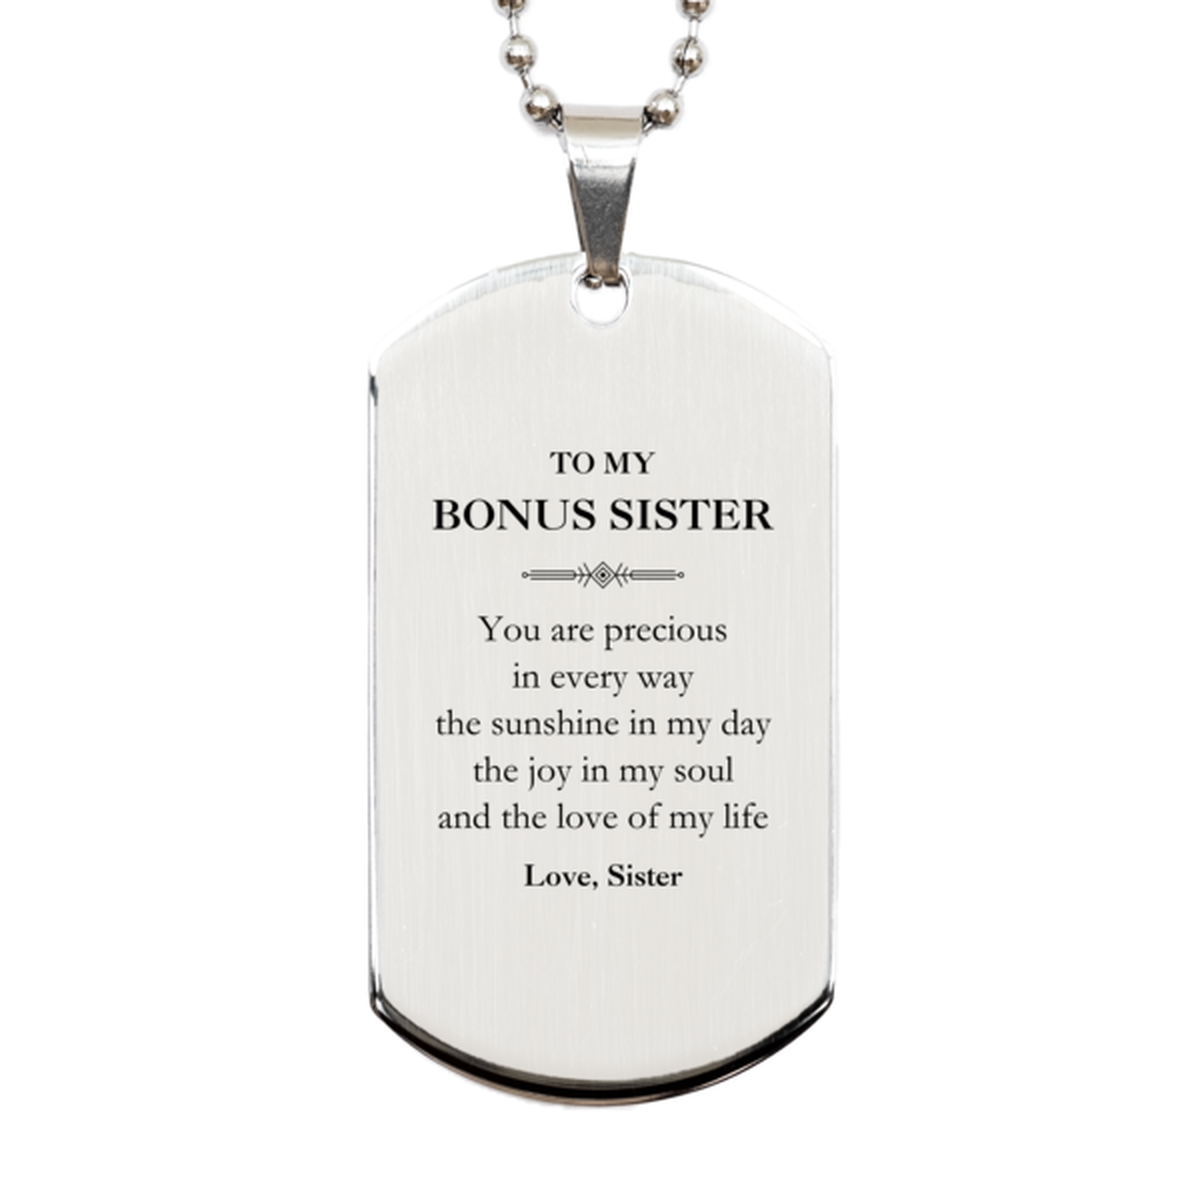 Graduation Gifts for Bonus Sister Silver Dog Tag Present from Sister, Christmas Bonus Sister Birthday Gifts Bonus Sister You are precious in every way the sunshine in my day. Love, Sister